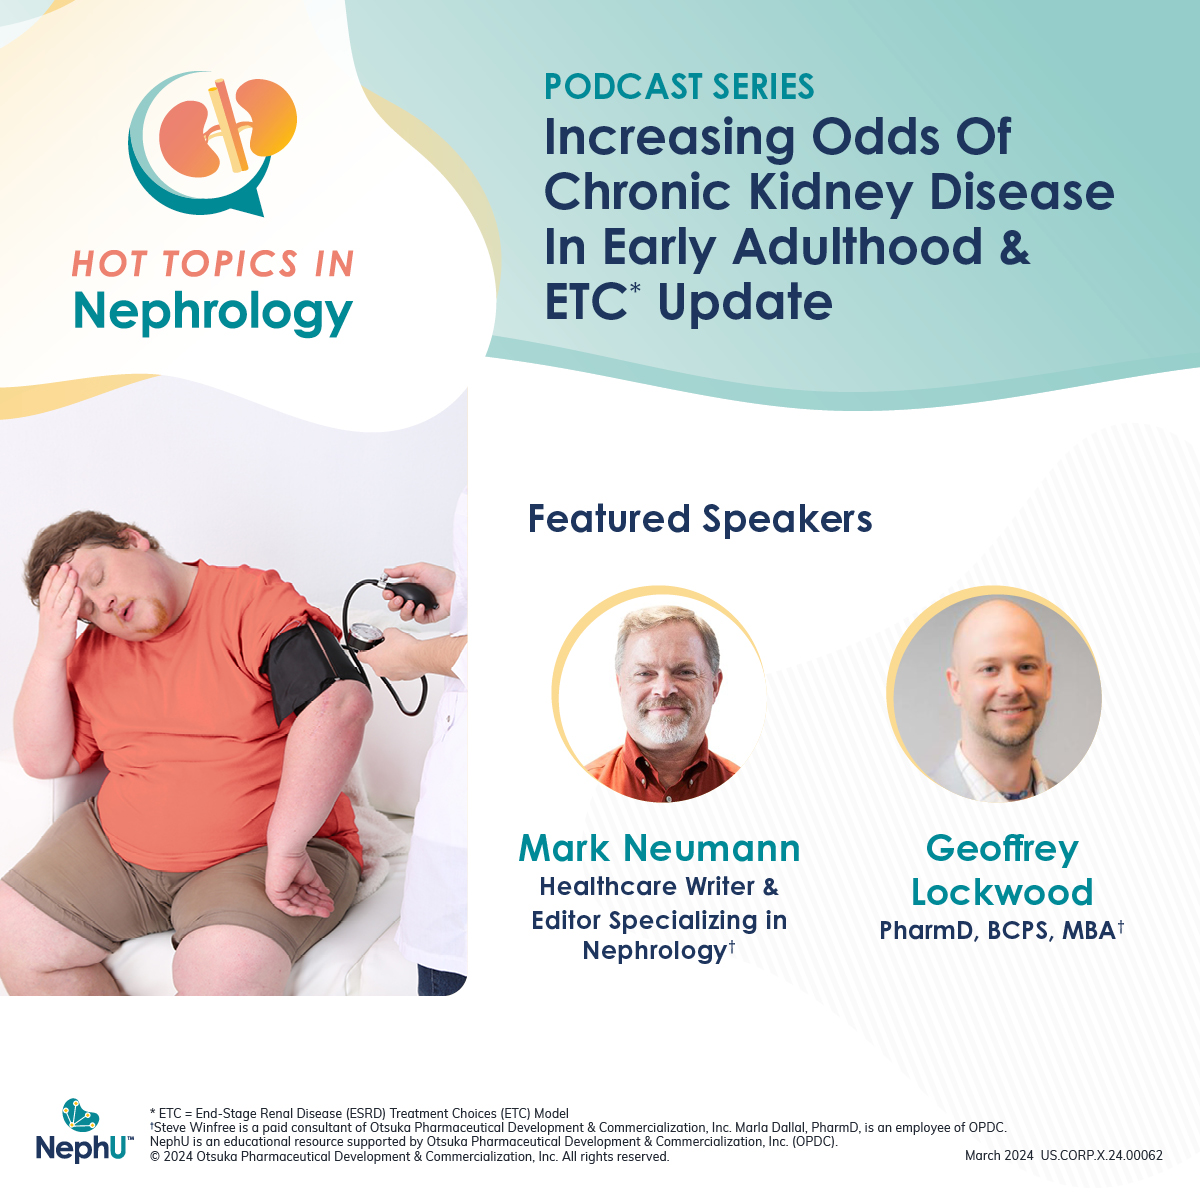 NephU's 'Hot Topics In Nephrology' podcast series, featuring Mark Neumann, explores CKD odds due to high BMI and the results of the second year ESRD treatment models in this latest episode. Listen now! go.nephu.org/MCGU #CKD #Nephrology #NephU #KidneyFailure